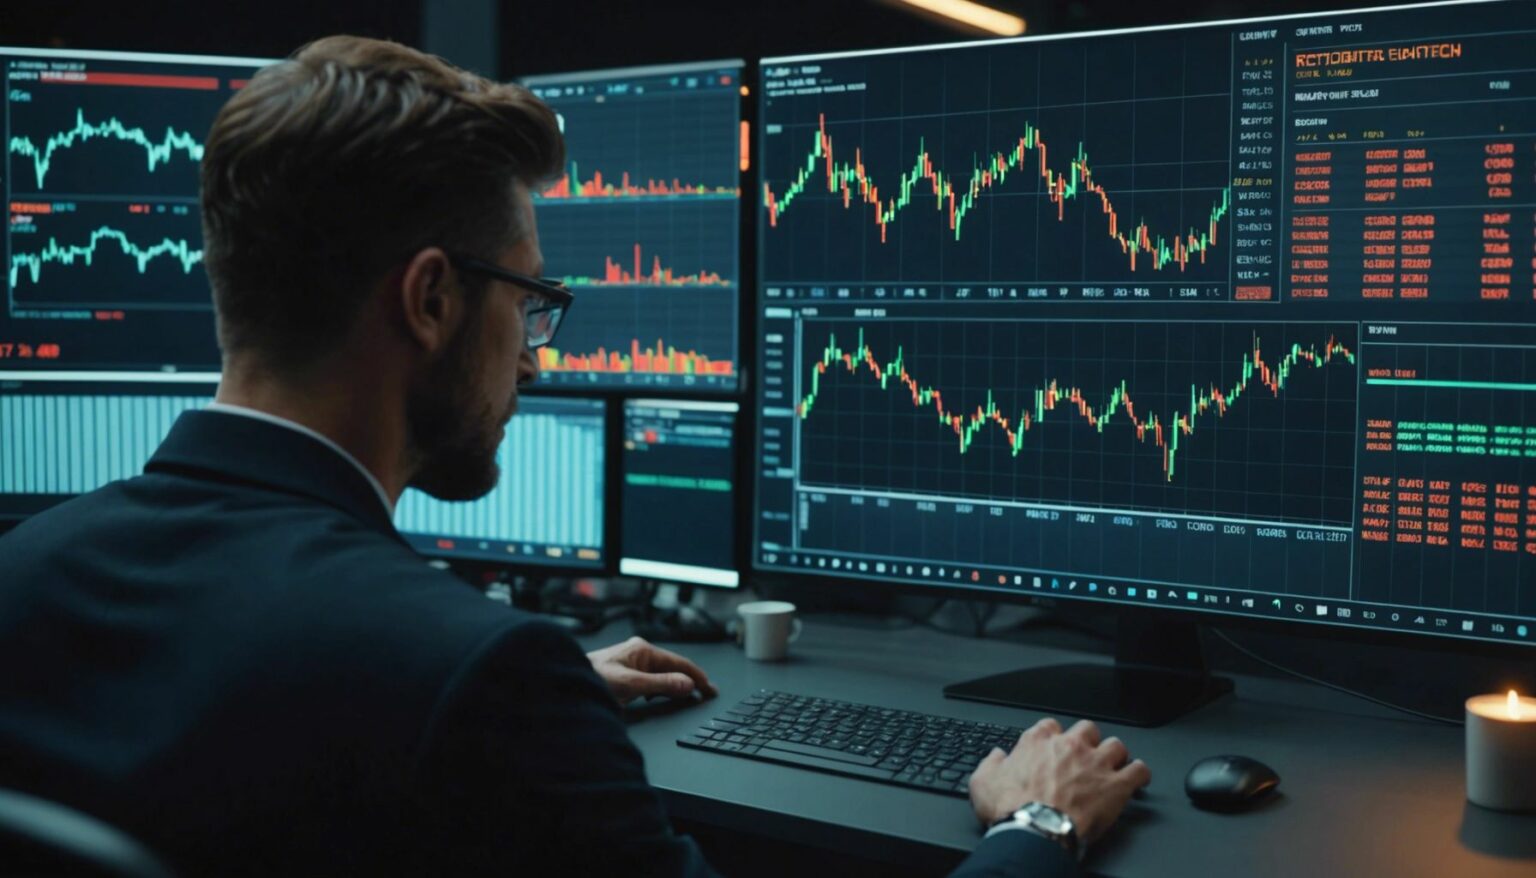 Futuristic trading interface with candlestick charts, cryptocurrency symbols, and a trader analyzing data on a holographic screen.